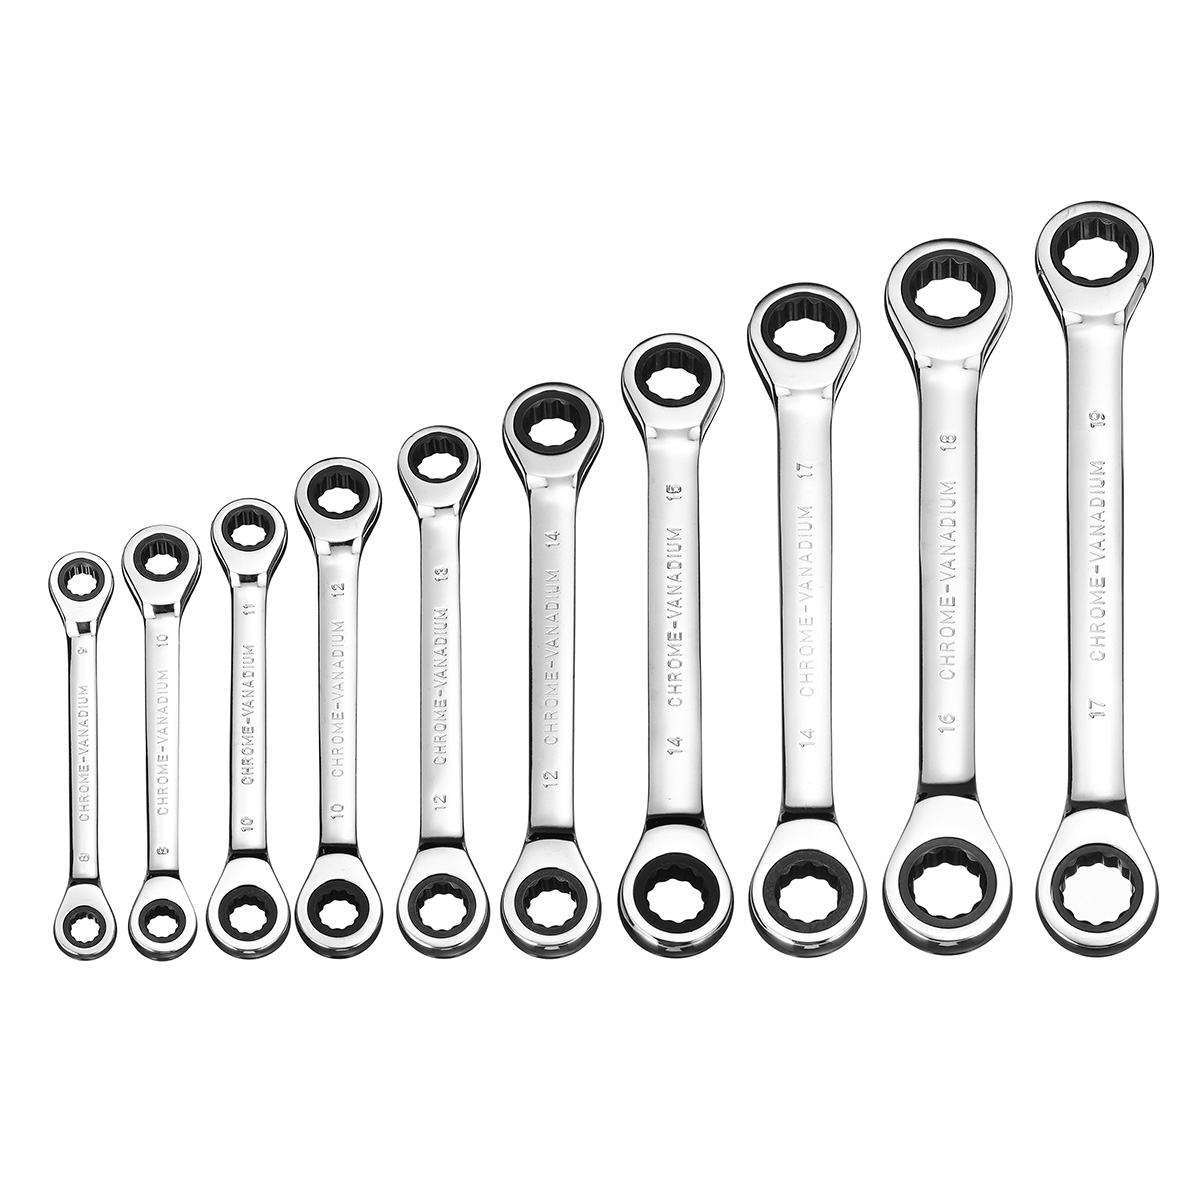 

8-19mm Steel Metric Fixed Head Ratchet Spanner Gear Wrench Double End Ring Tool